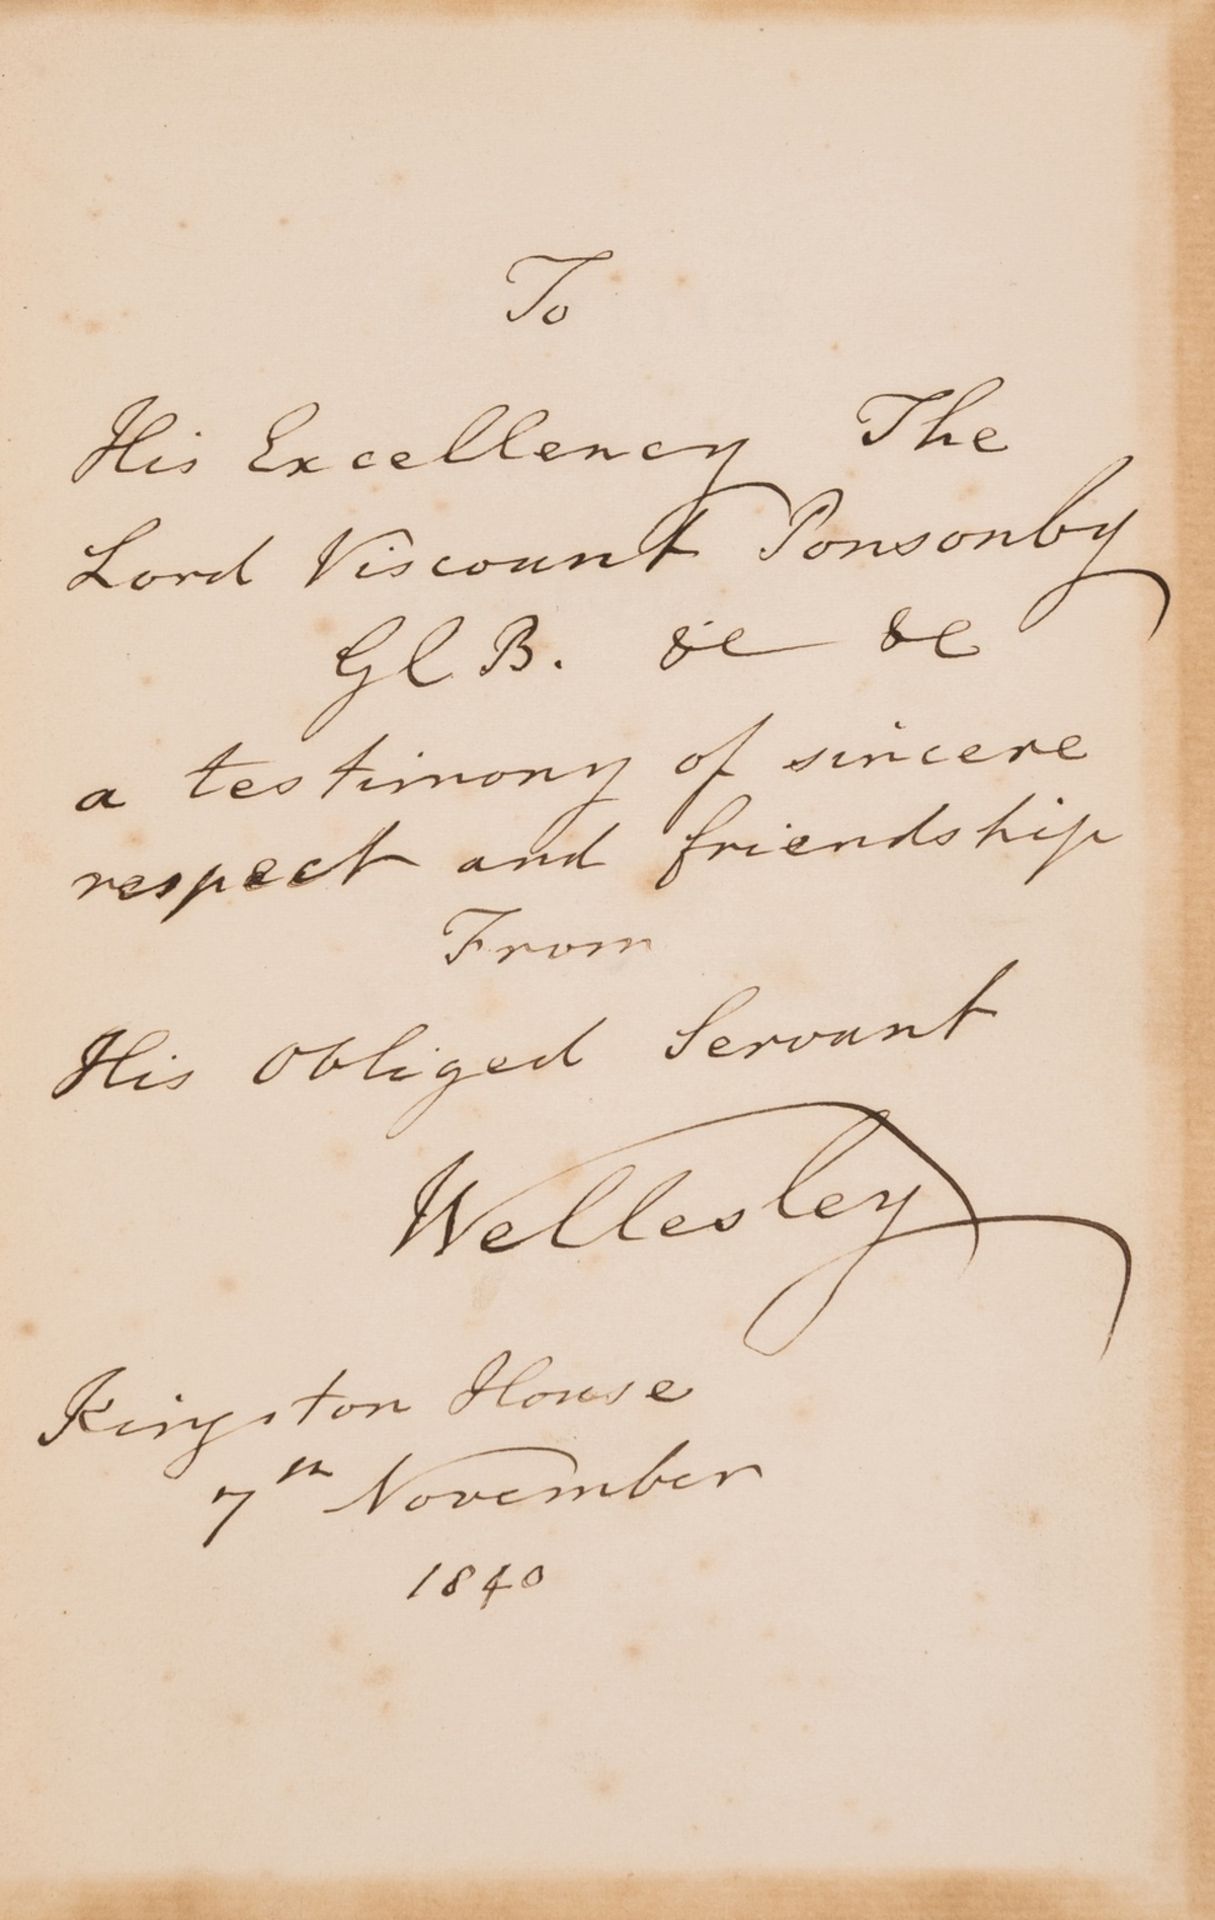 Wellesley (Richard, Marquess Wellesley) Primitiae et Reliquiae, signed presentation copy from the …